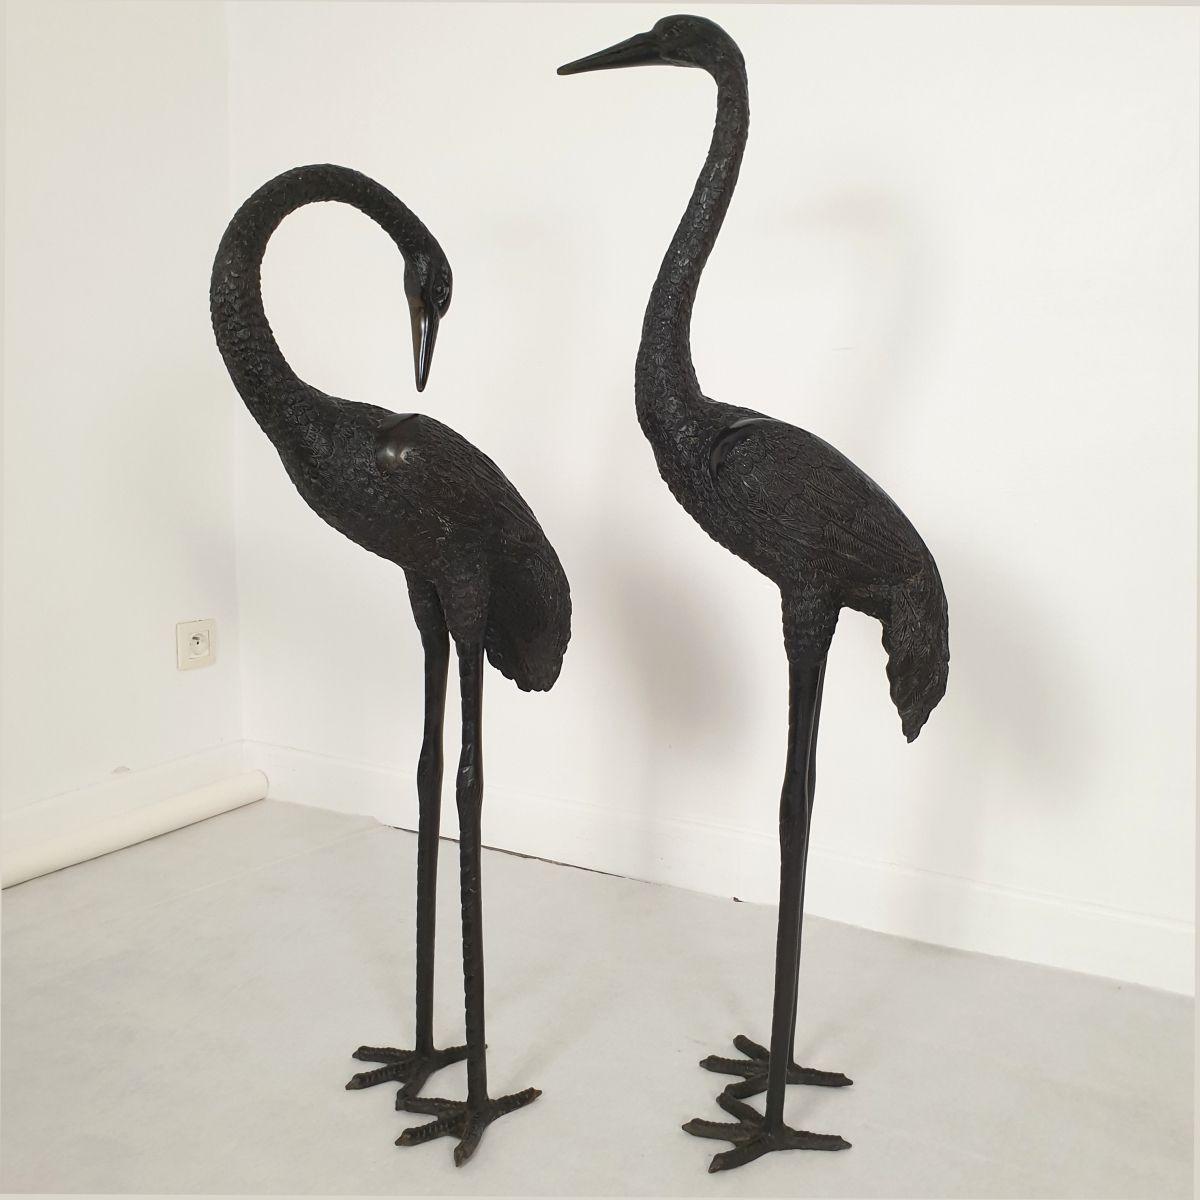 Set of two large crane birds sculptures, France circa 1950s or earlier.
The Hollywood Regency style birds sculptures are in life size.
They can be both inside or outside art sculptures.
The pair of Mid Century large decorative birds is made of